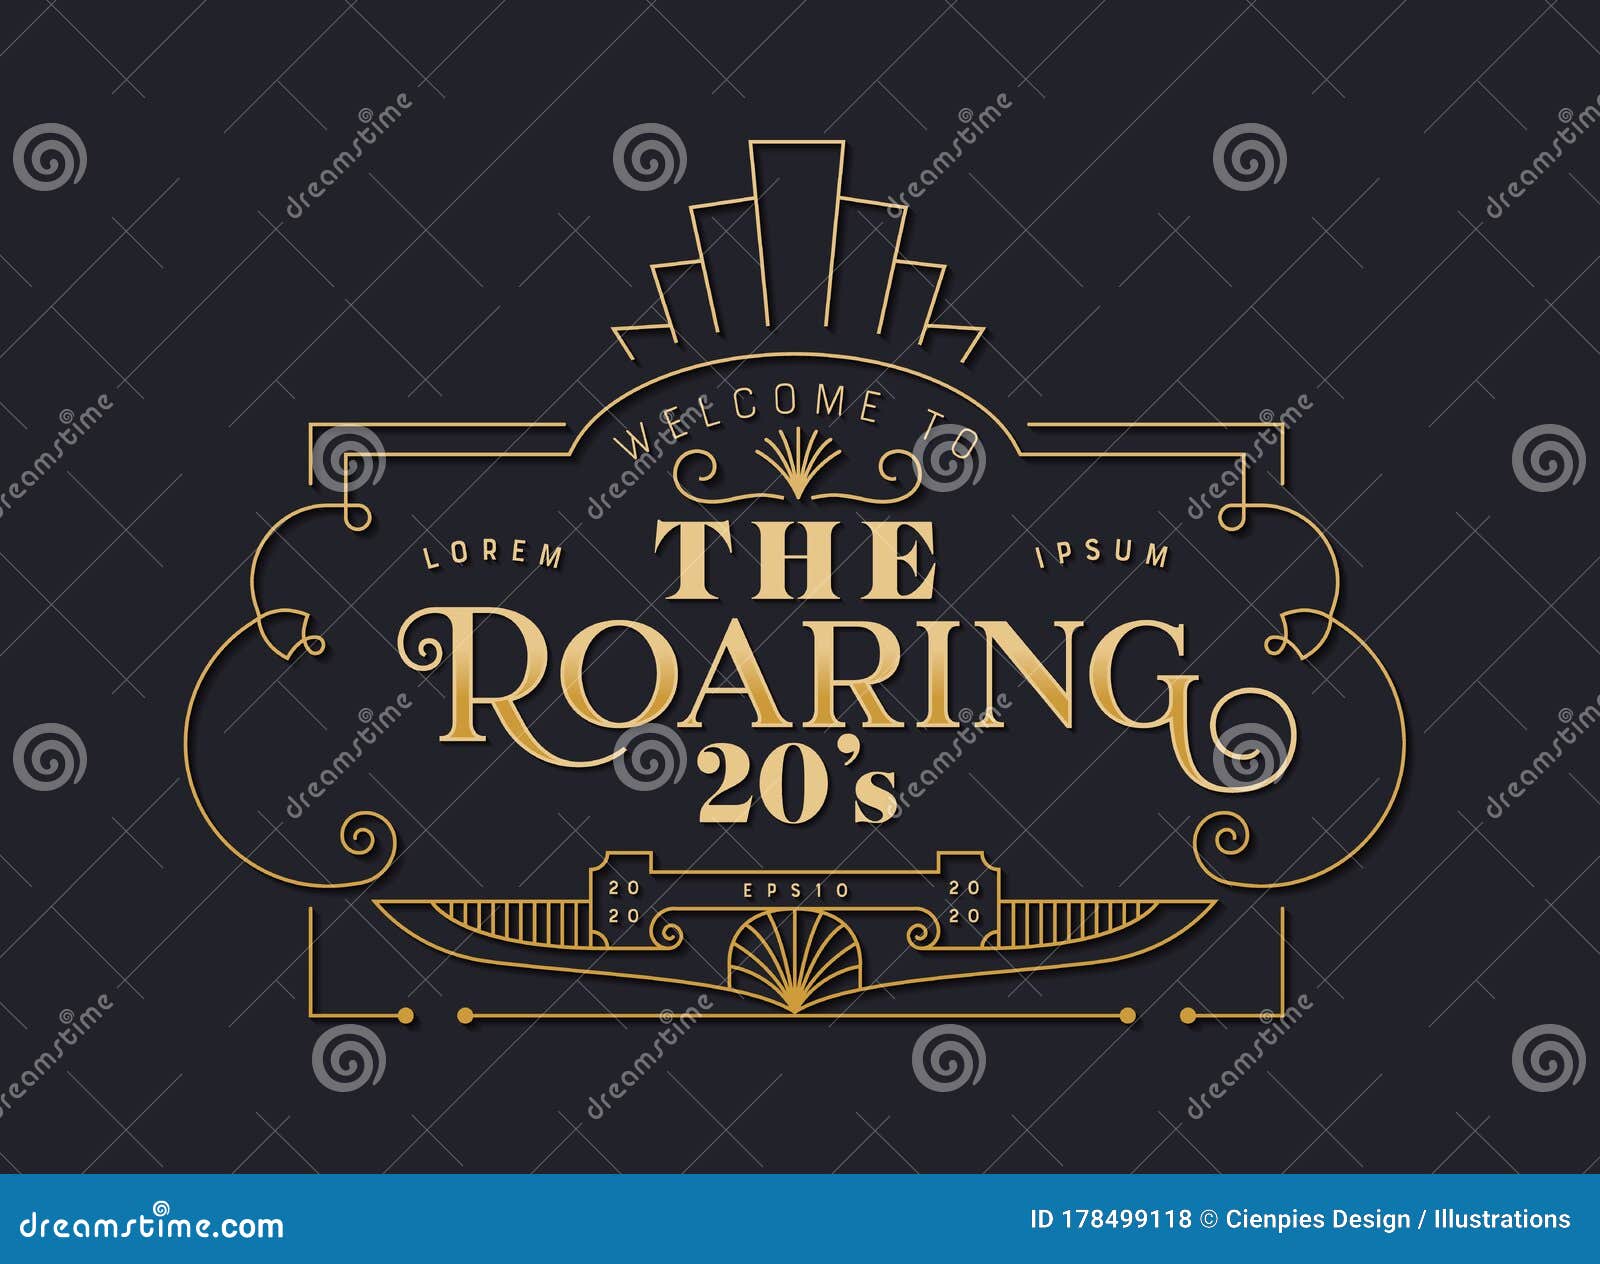 the roaring 20s gold art deco frame background